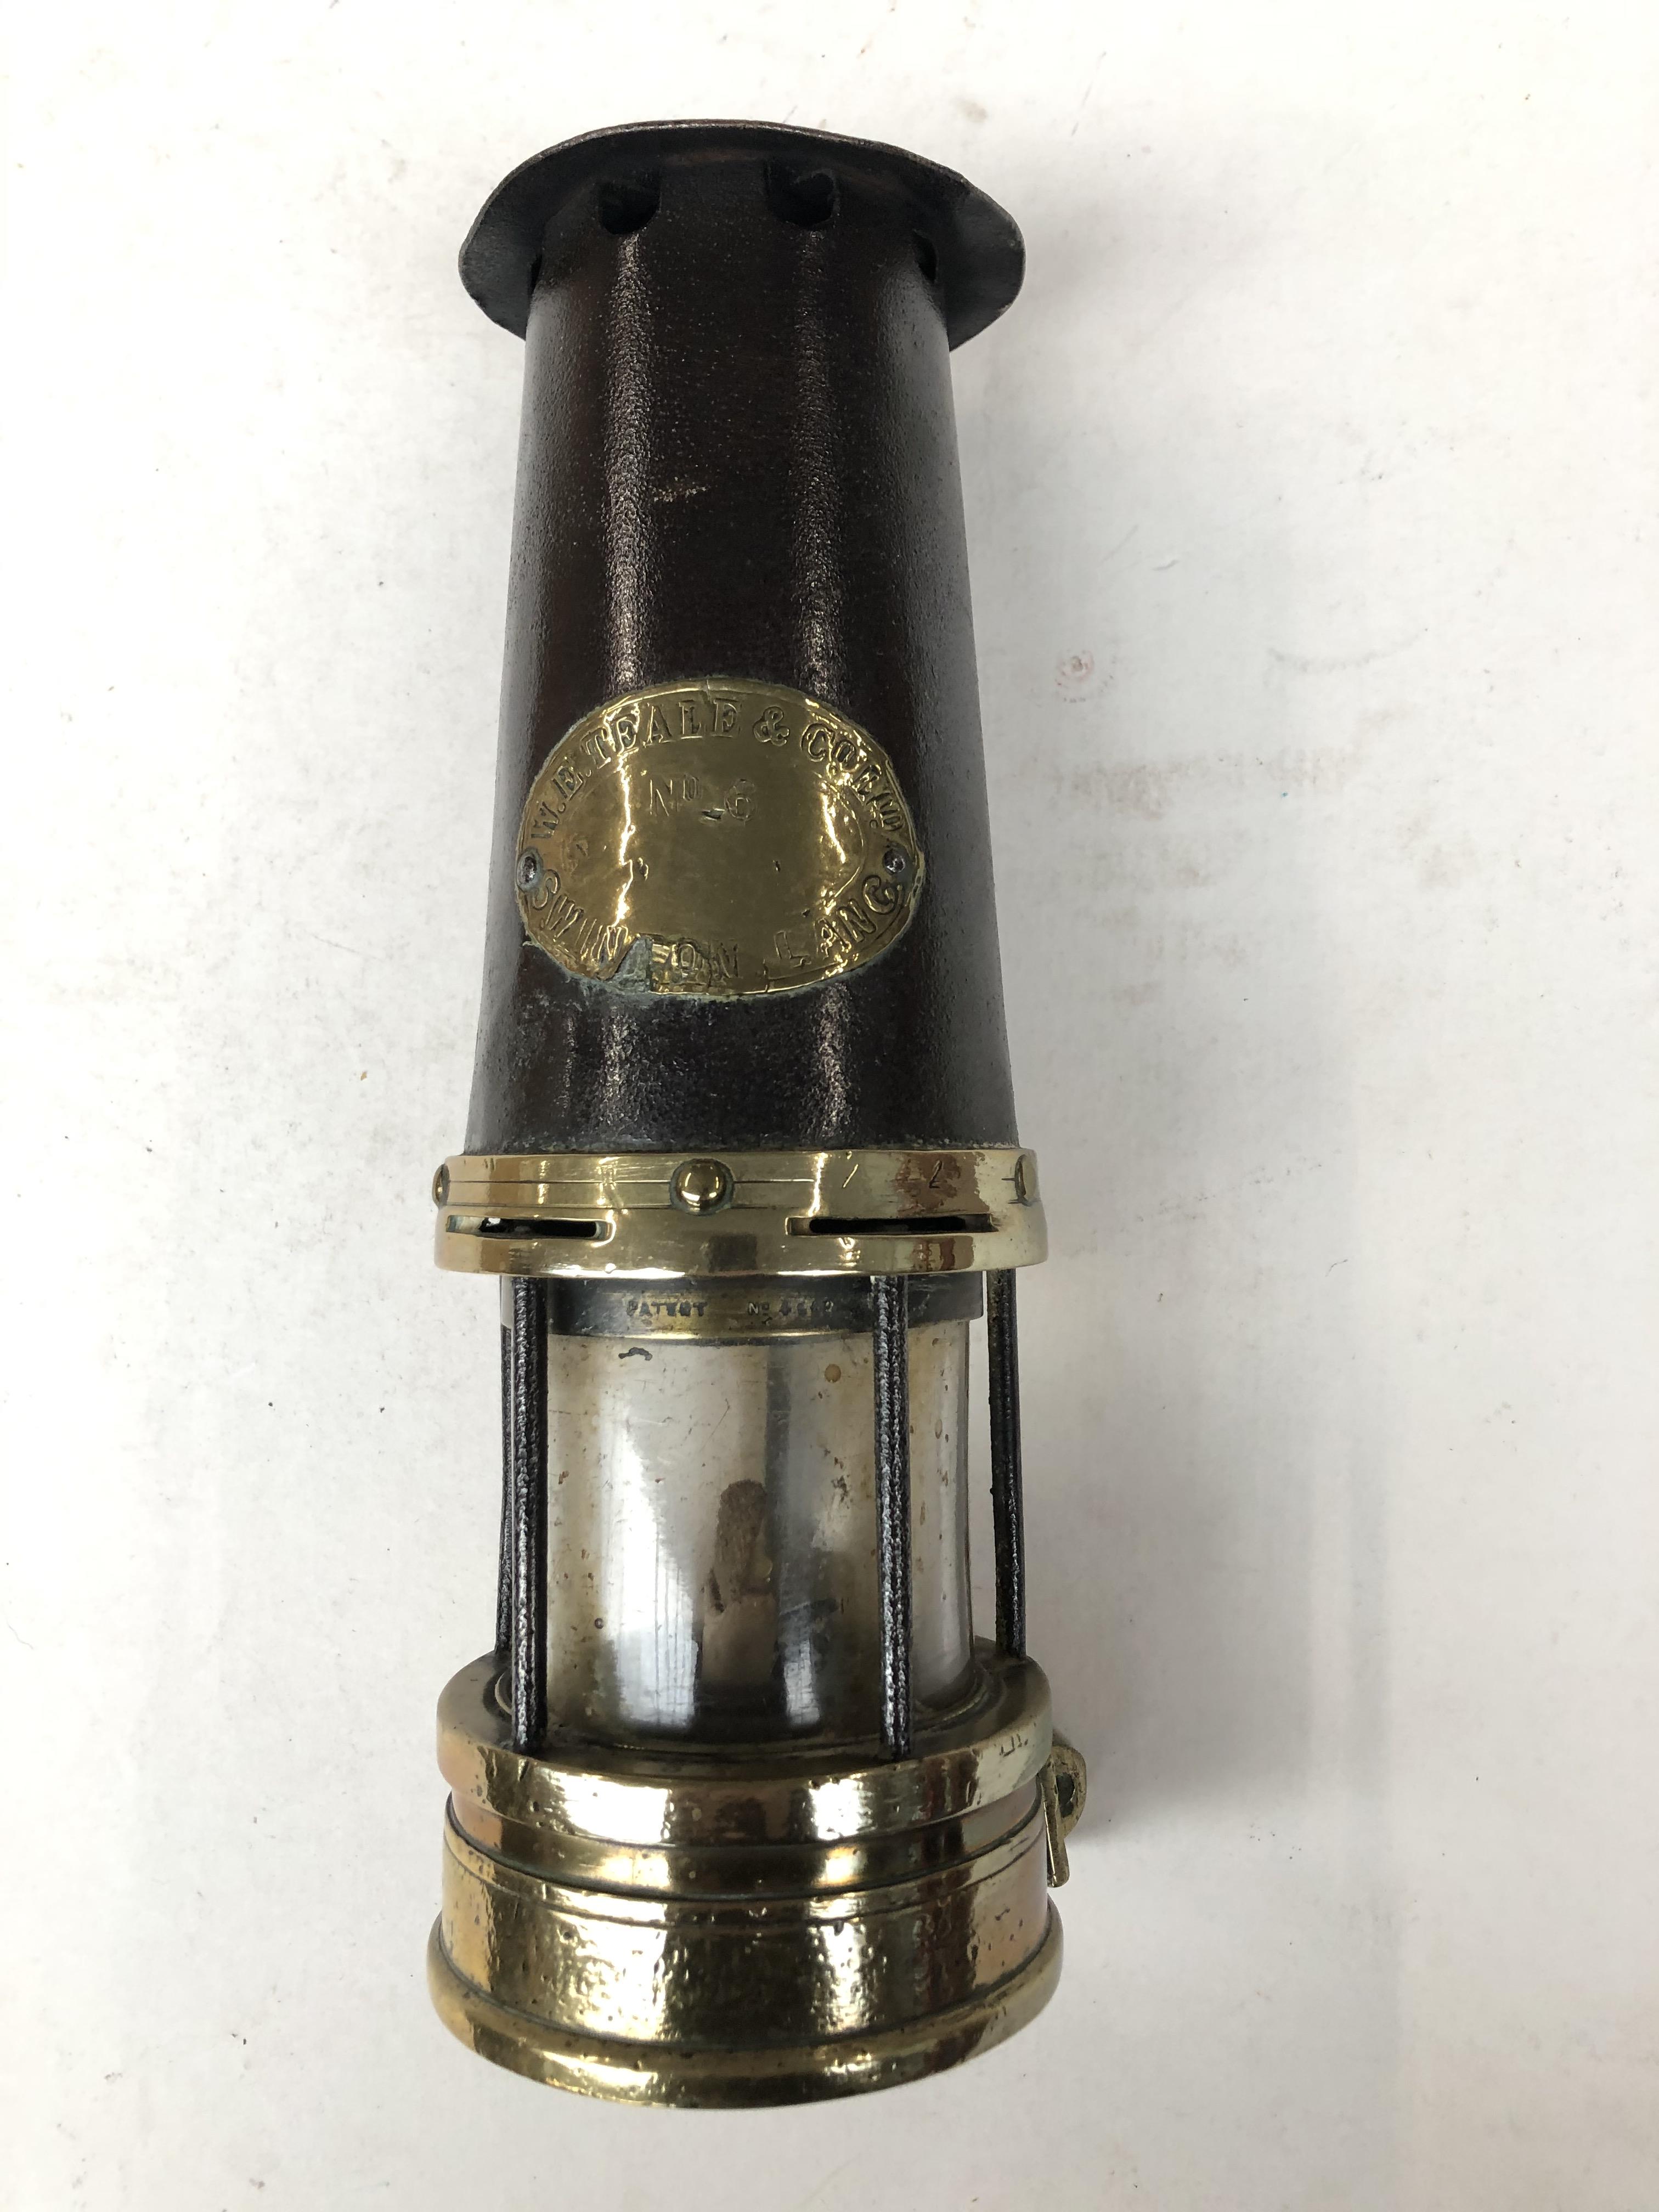 Vintage miners lamp by W. E Teale and company - Image 2 of 8